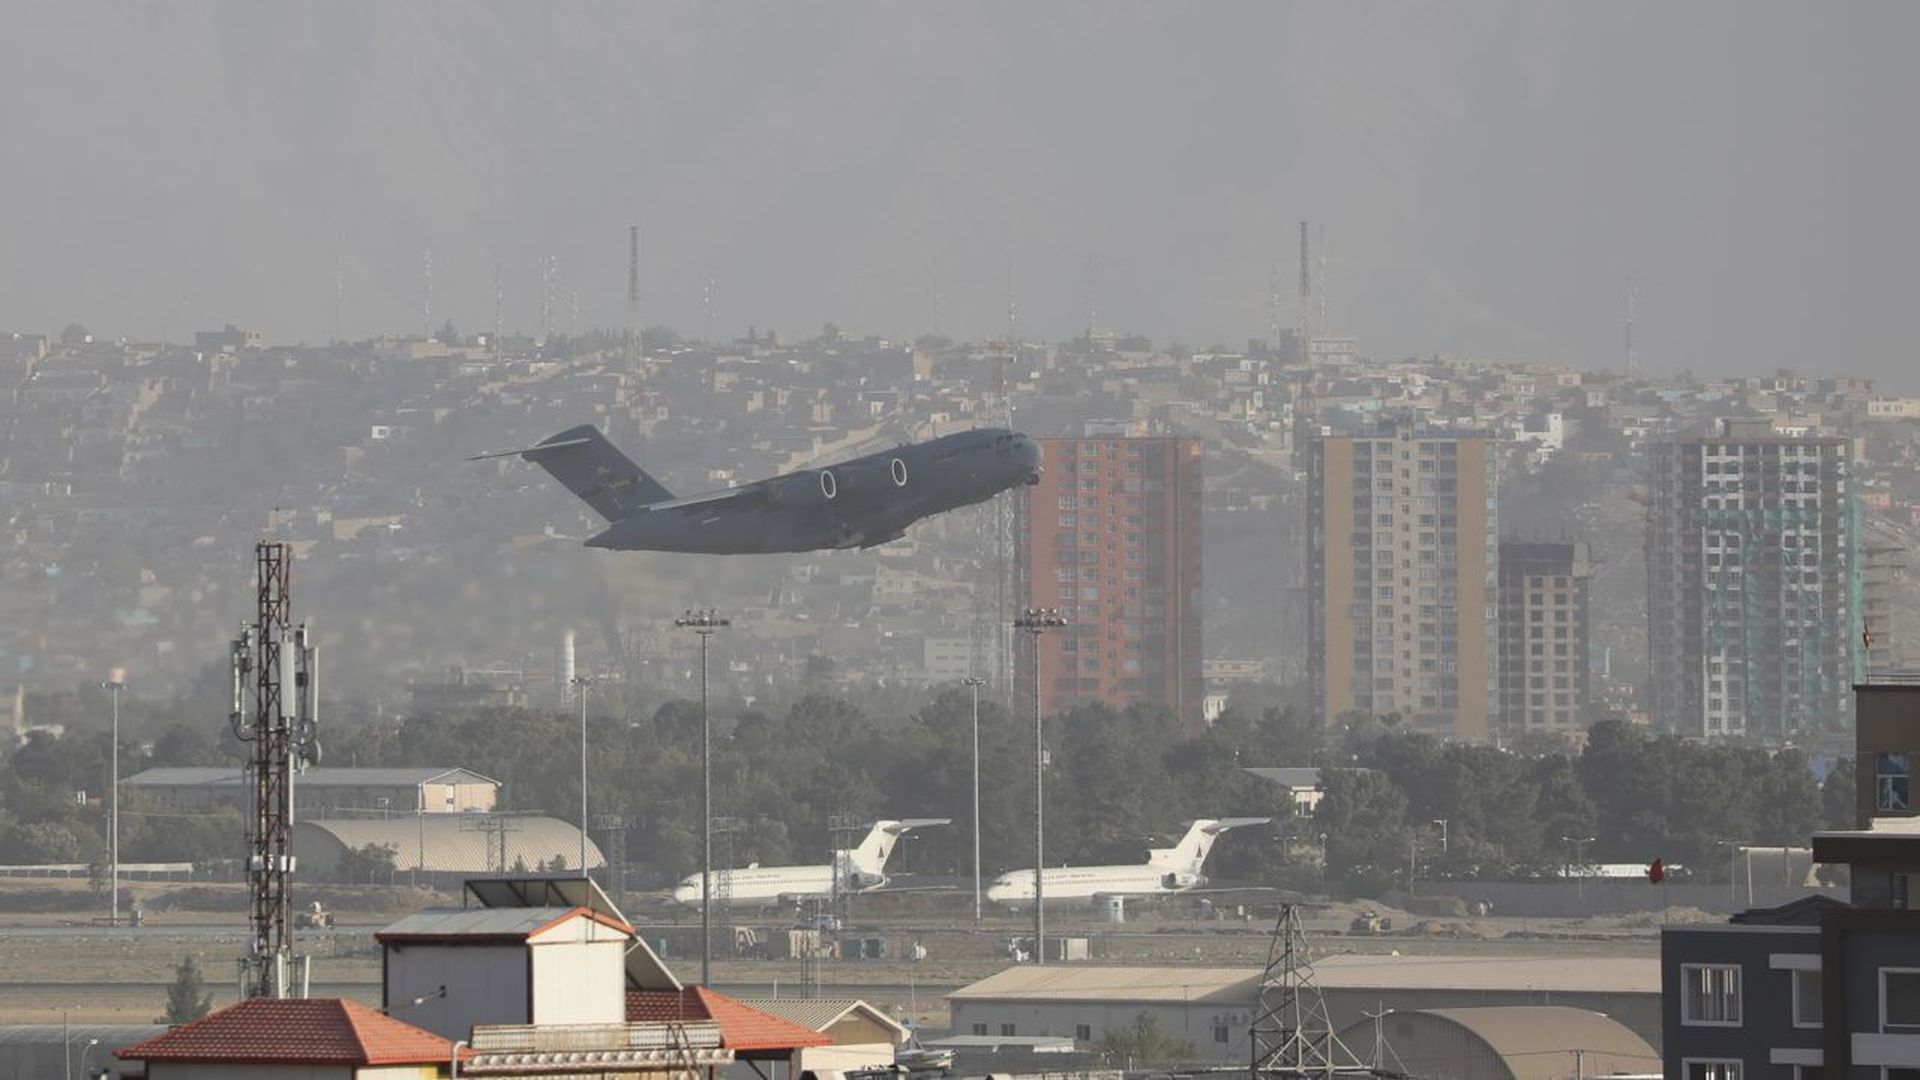 A military plane leaving Hamid Karzai International Airport in Kabul on Aug. 27.